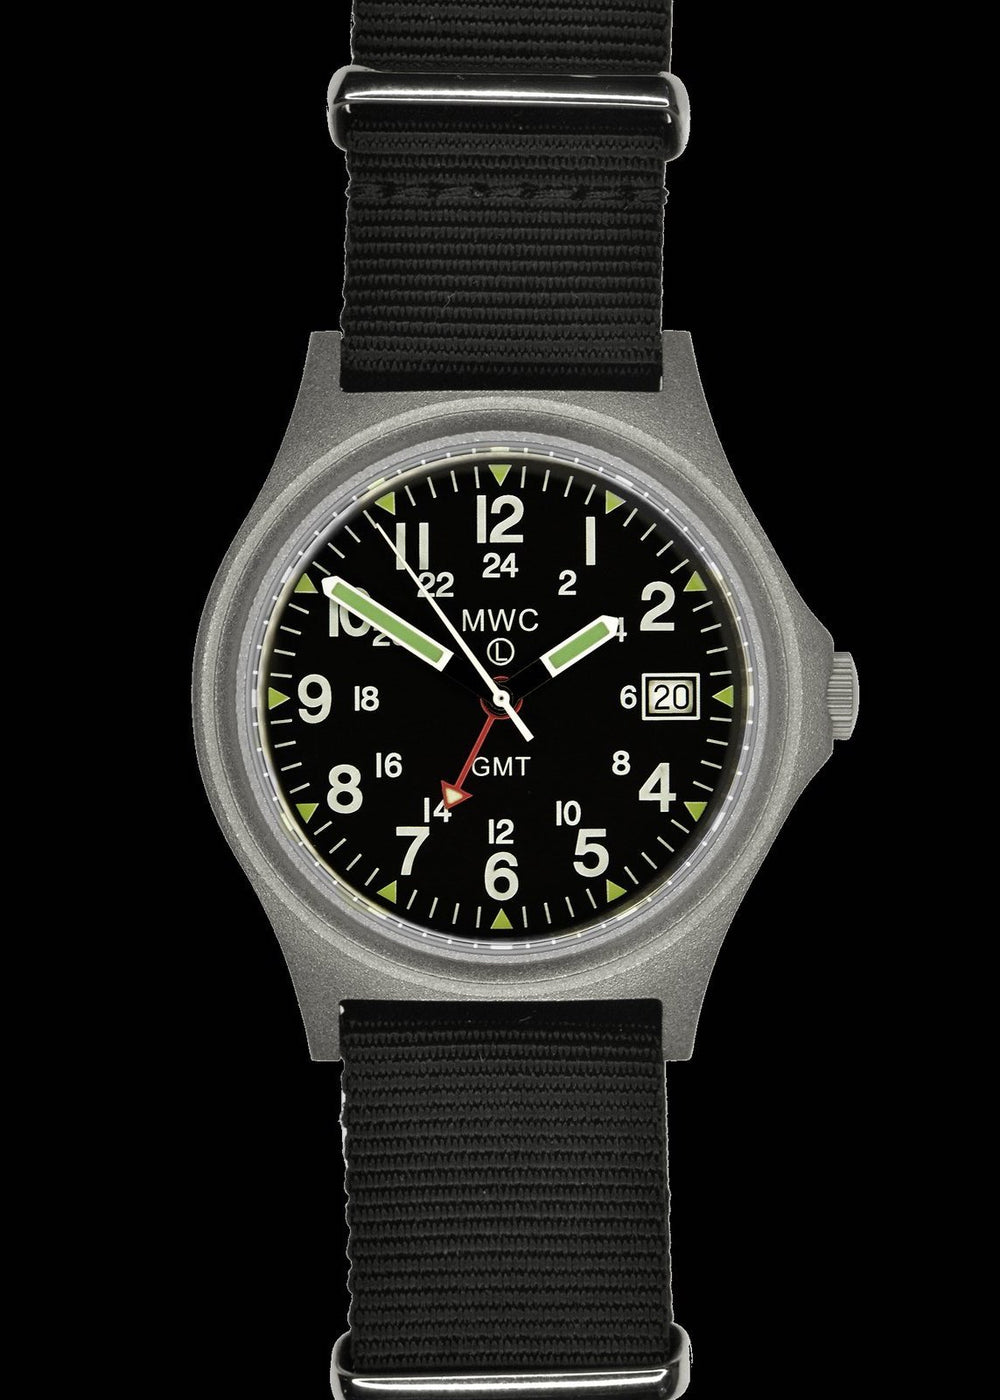 MWC Classic Watch - GMT Dual Timezone 100m Water Resistant Model with Stainless Steel Case